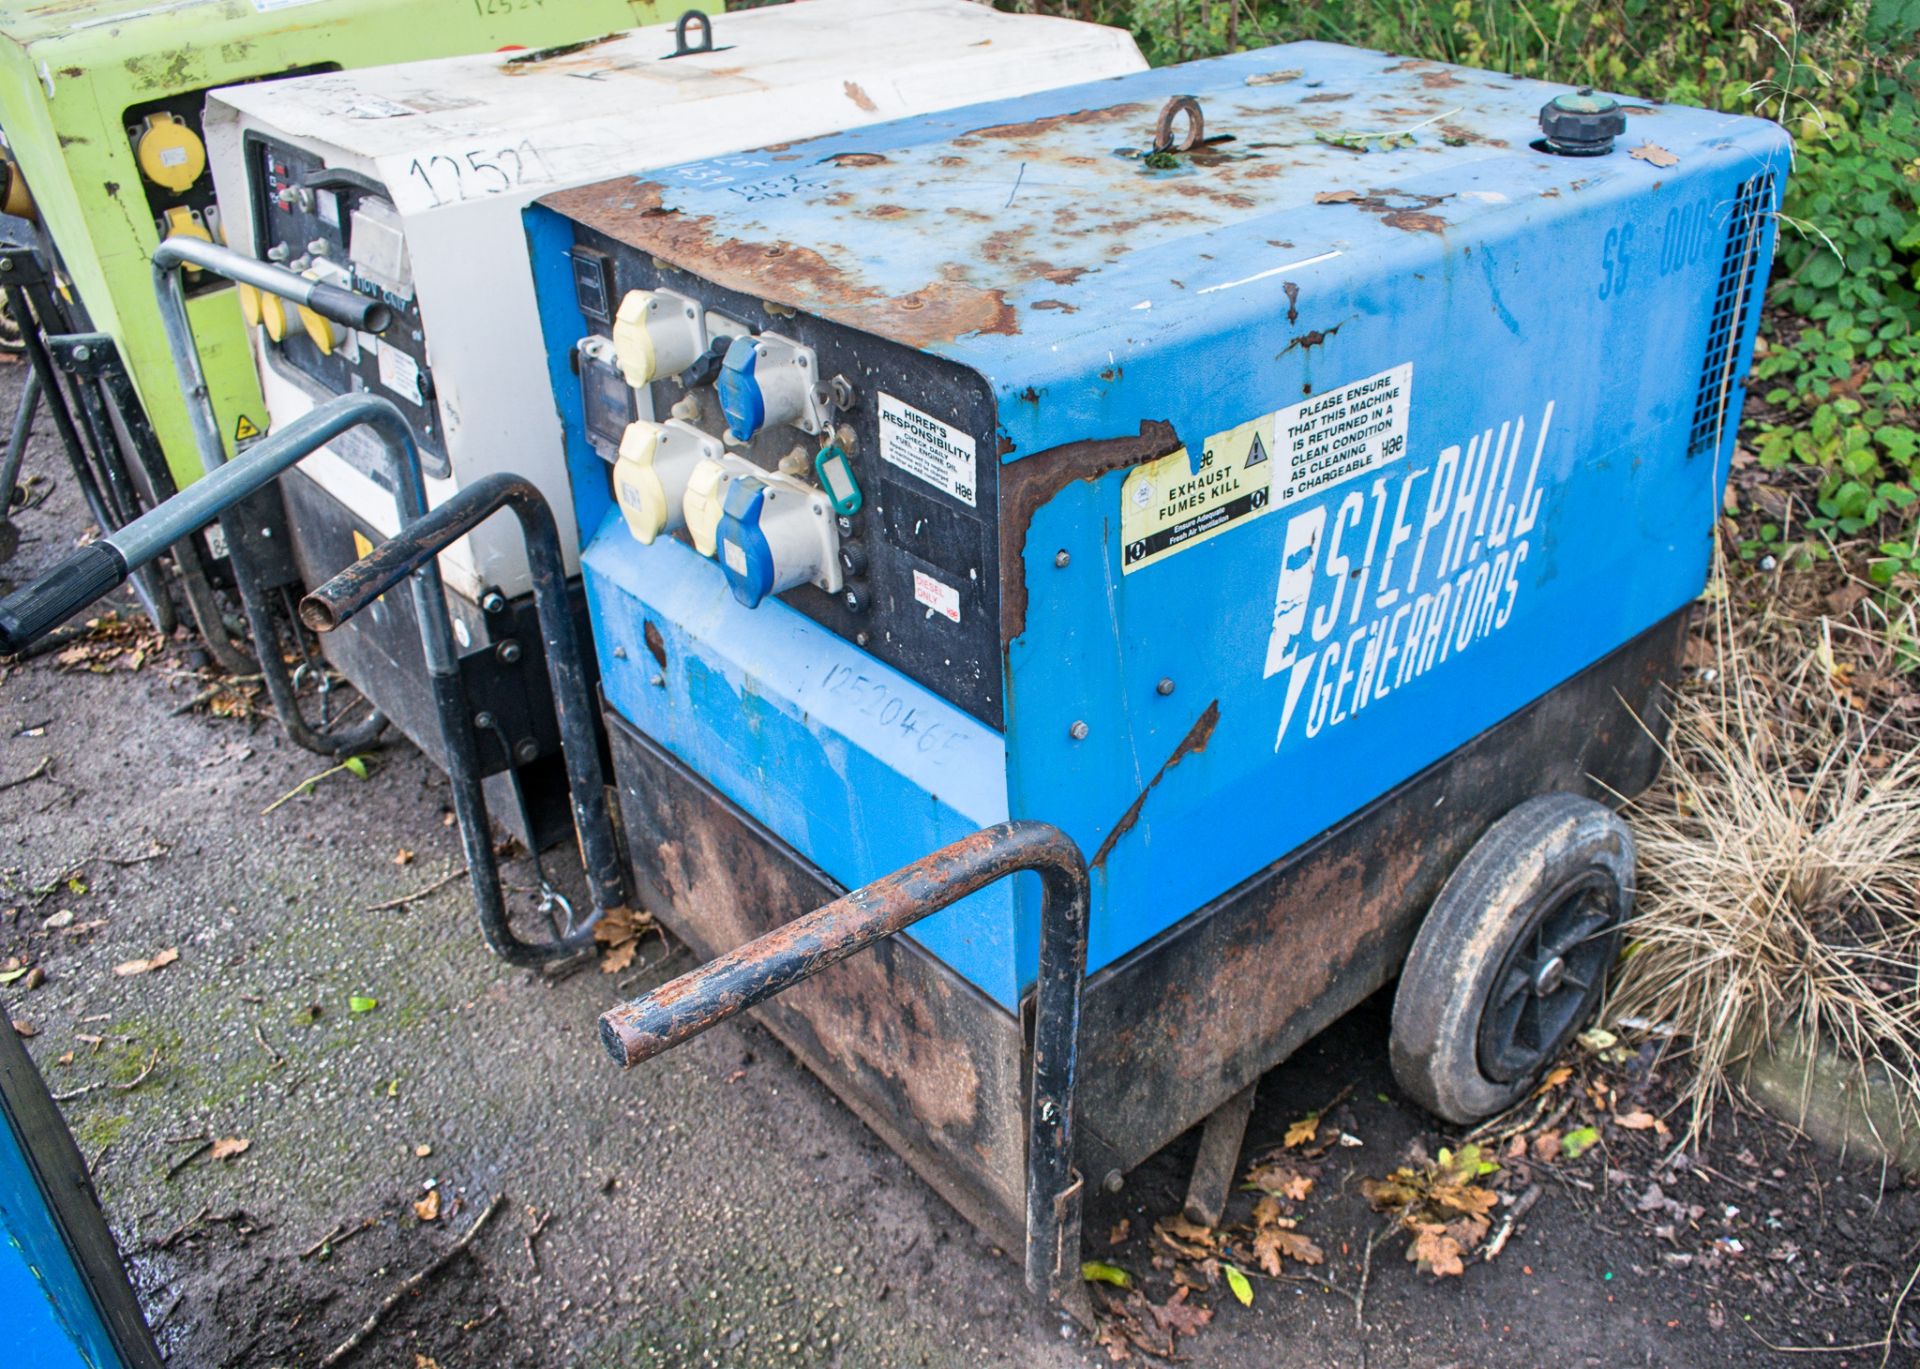 Stephill SSD6000S 6 kva diesel driven generator Recorded Hours: 2896